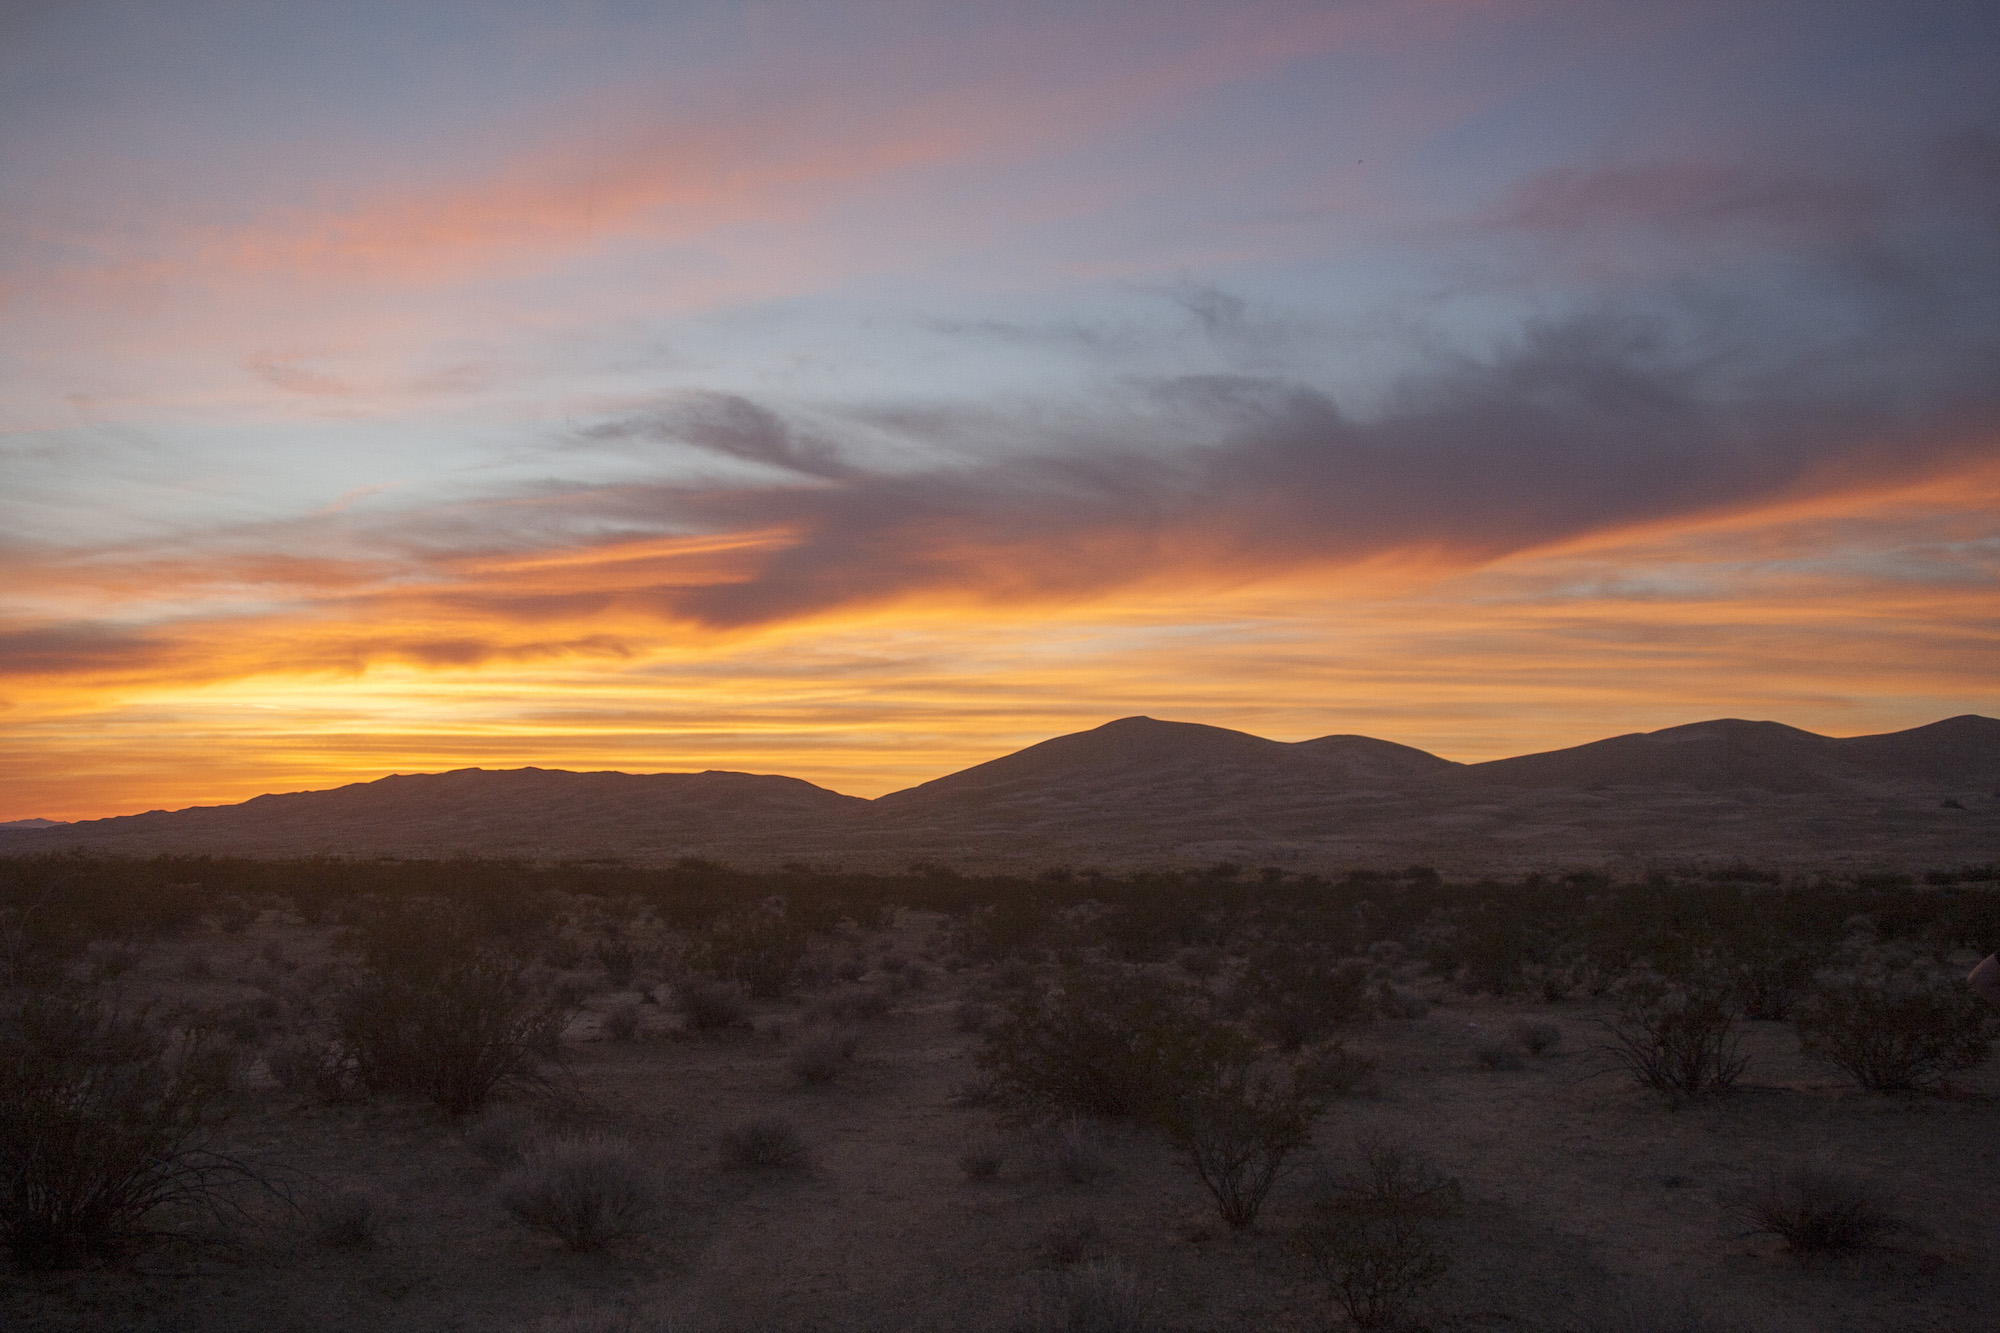 We got to catch a desert sunset over the Kelso Dunes